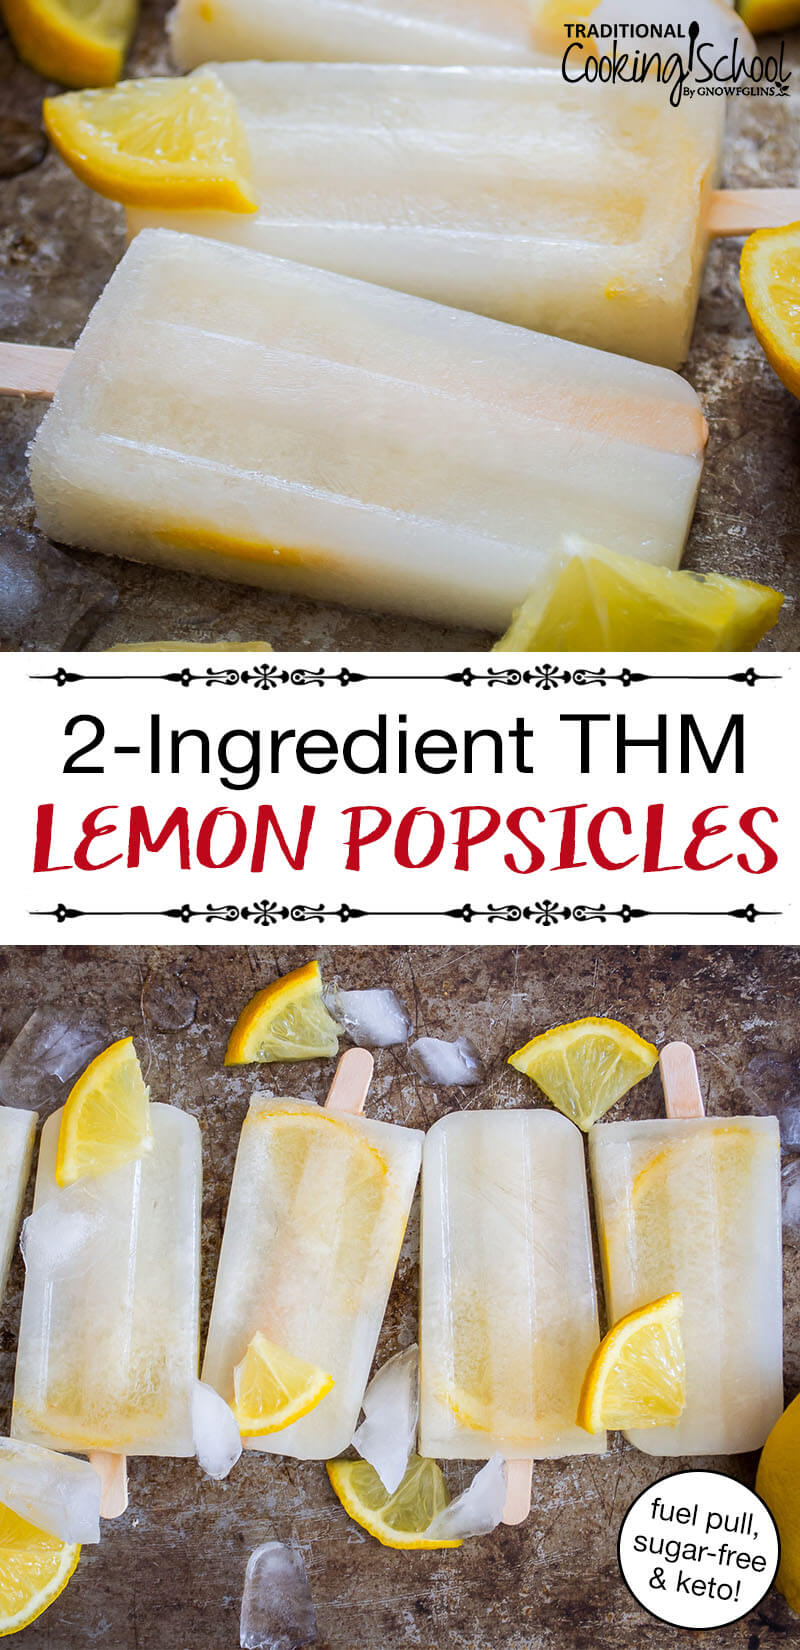 Pinterest pin with two images of lemon popsicles on a tray. Text overlay says, "2-Ingredient THM Lemon Popsicles - Fuel Pull, Sugar-Free & Keto!".